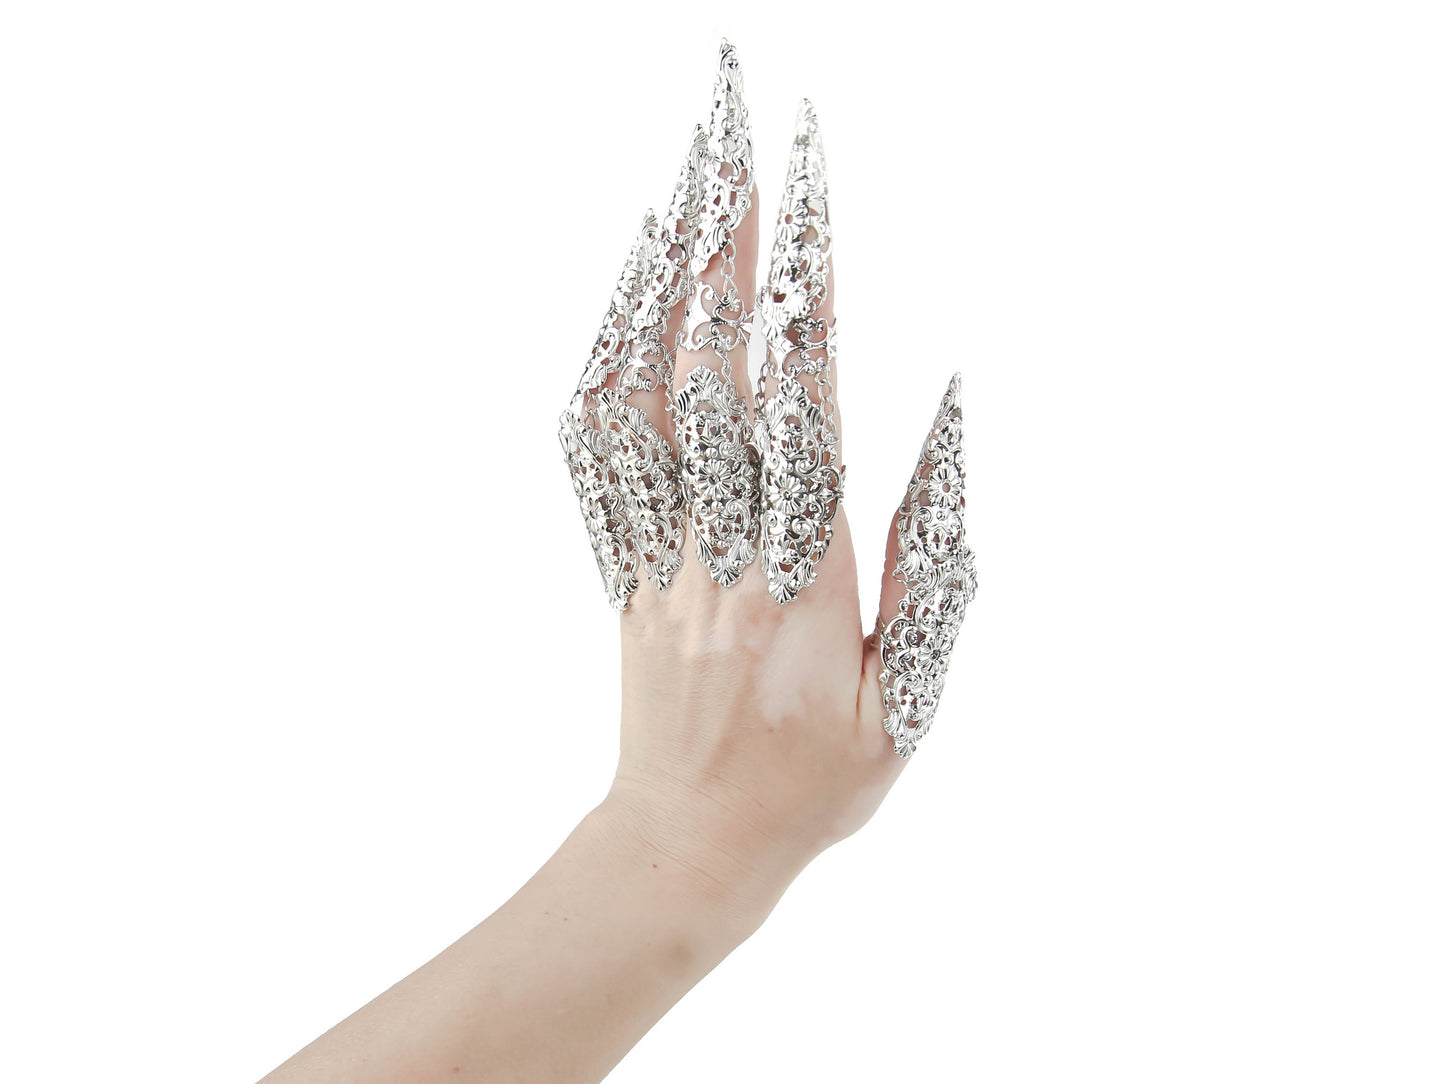 A hand is strikingly adorned with Myril Jewels' silver filigree finger armor, a neo-gothic masterpiece perfect for a whimsigoth or witchcore aesthetic. Ideal for Halloween, punk events, or gothic-chic occasions, this jewelry evokes an air of dark elegance and alternative sophistication.